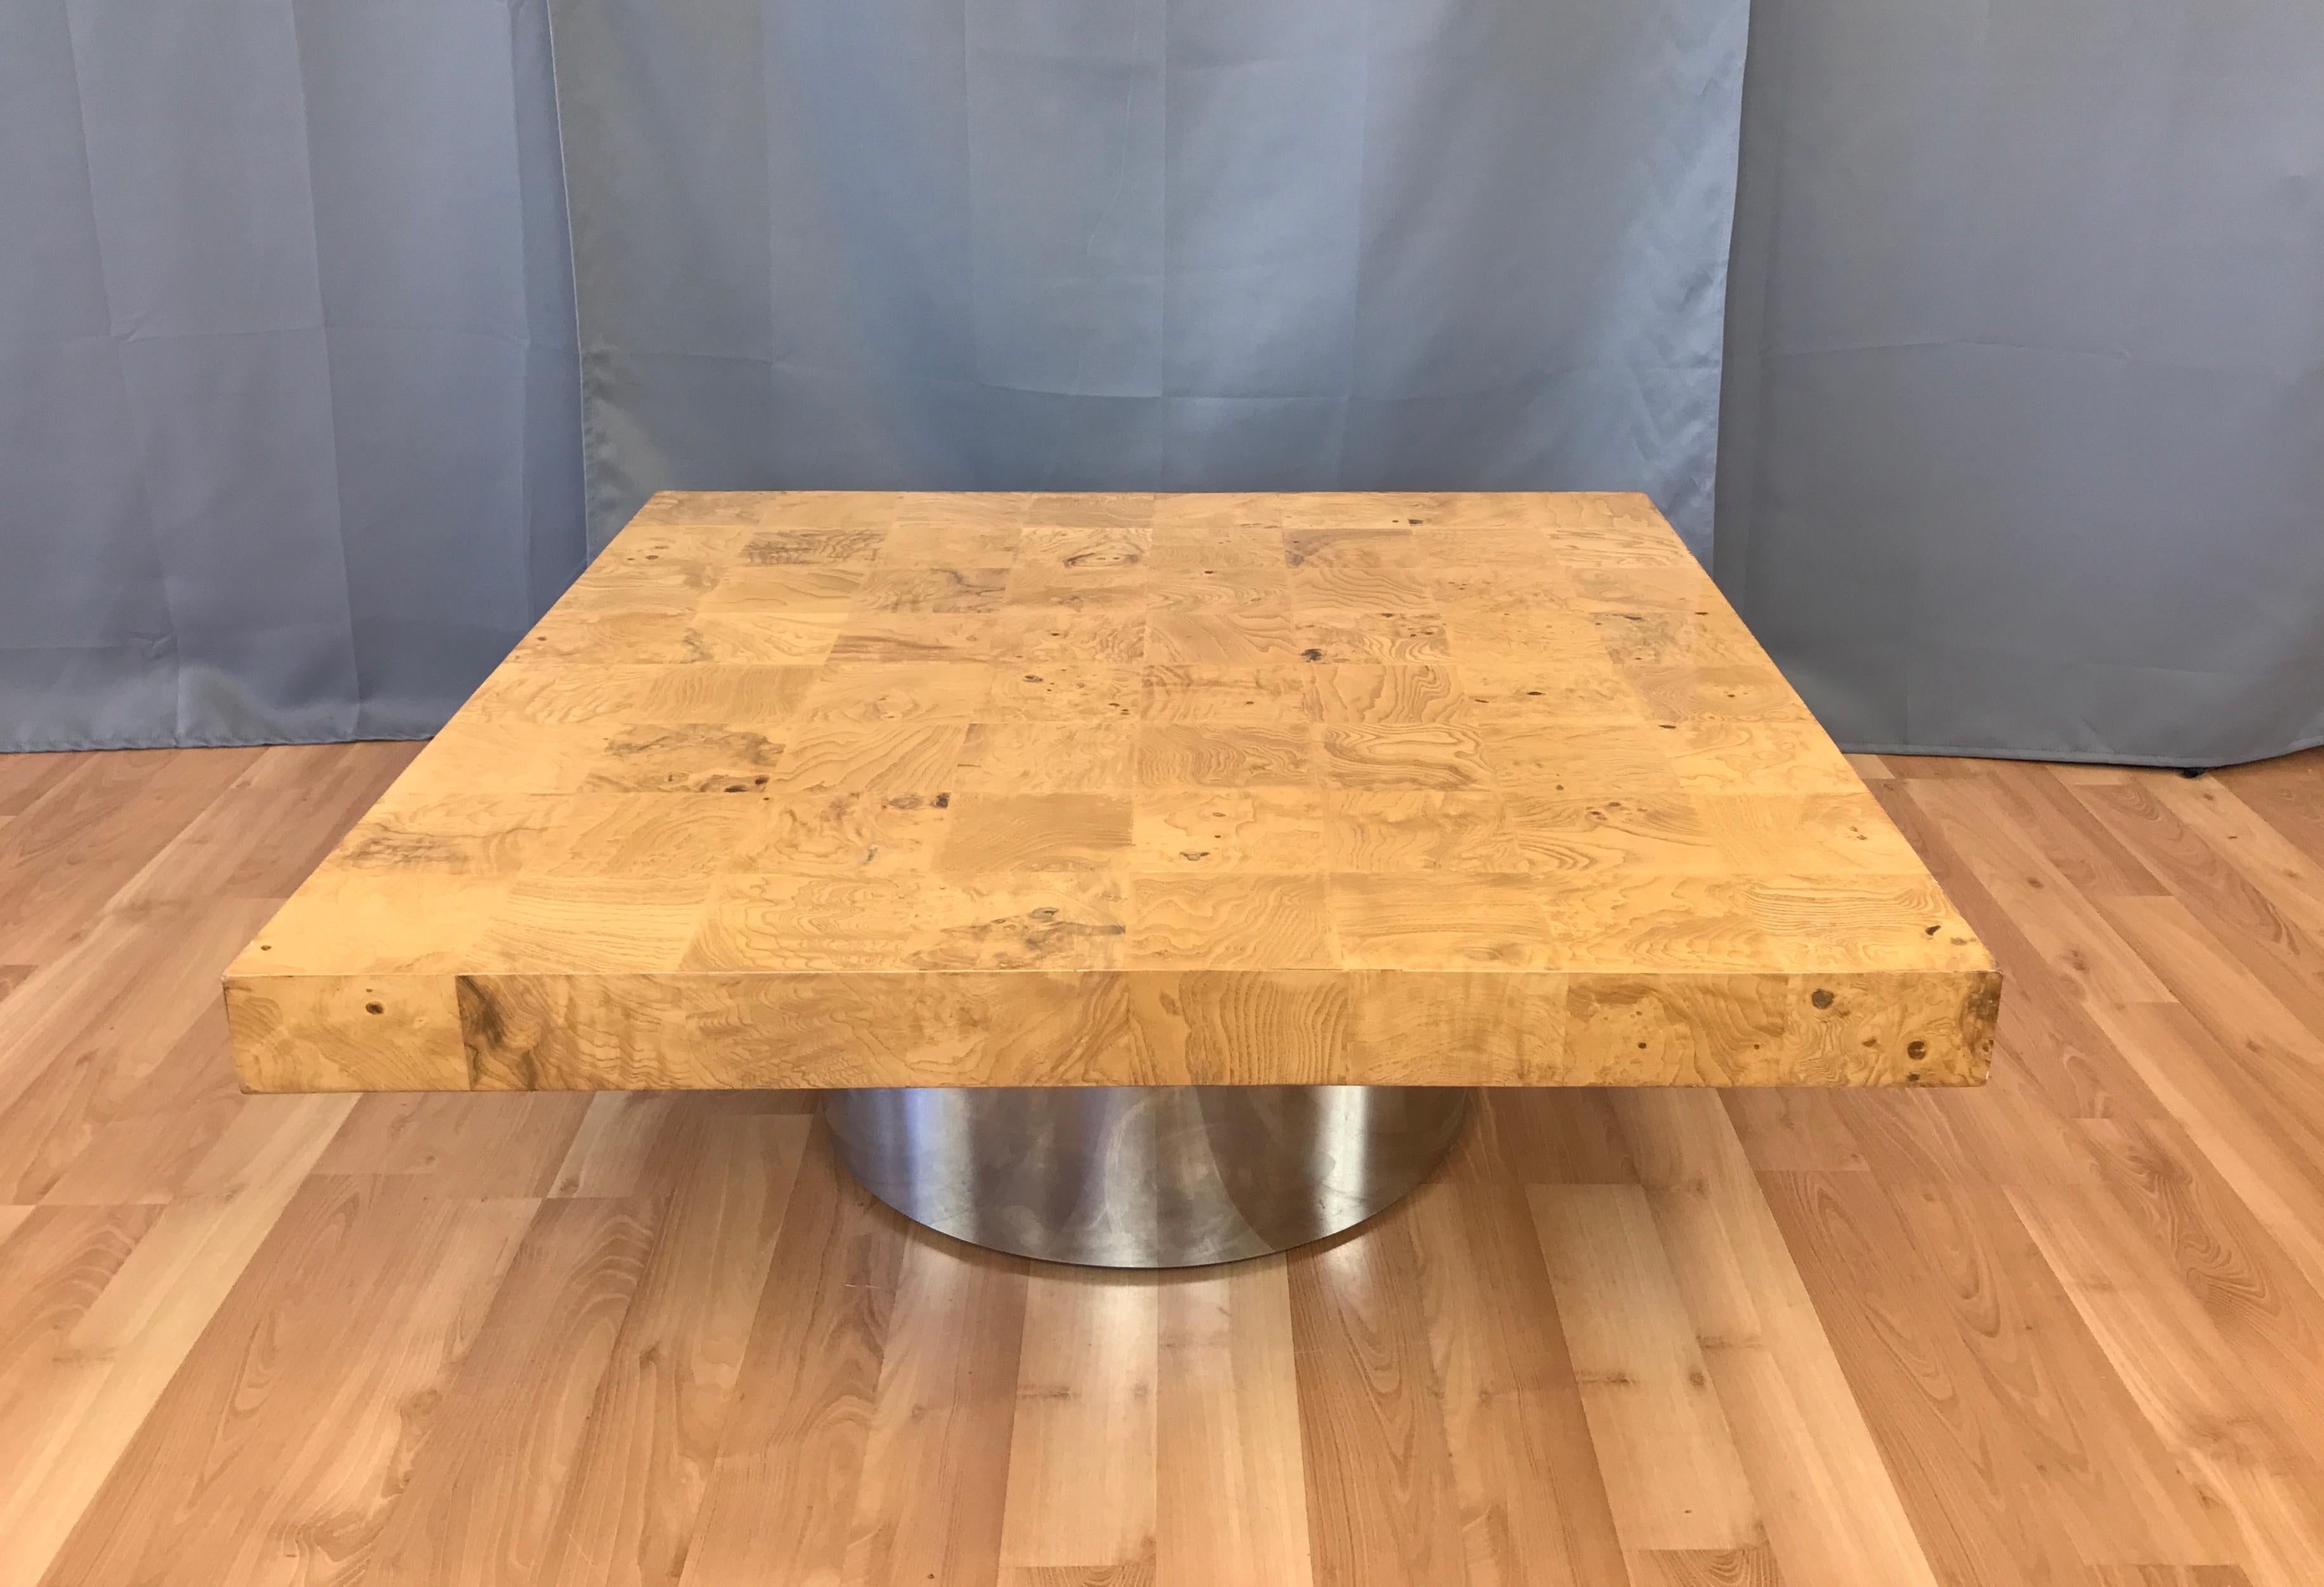 An impressive burl wood square coffee table with cylindrical metal base attributed to Milo Baughman.

Top features highly figured maple burl veneer squares, with eight to a side. Drun base is mirror polished steel. A super clean and minimalist